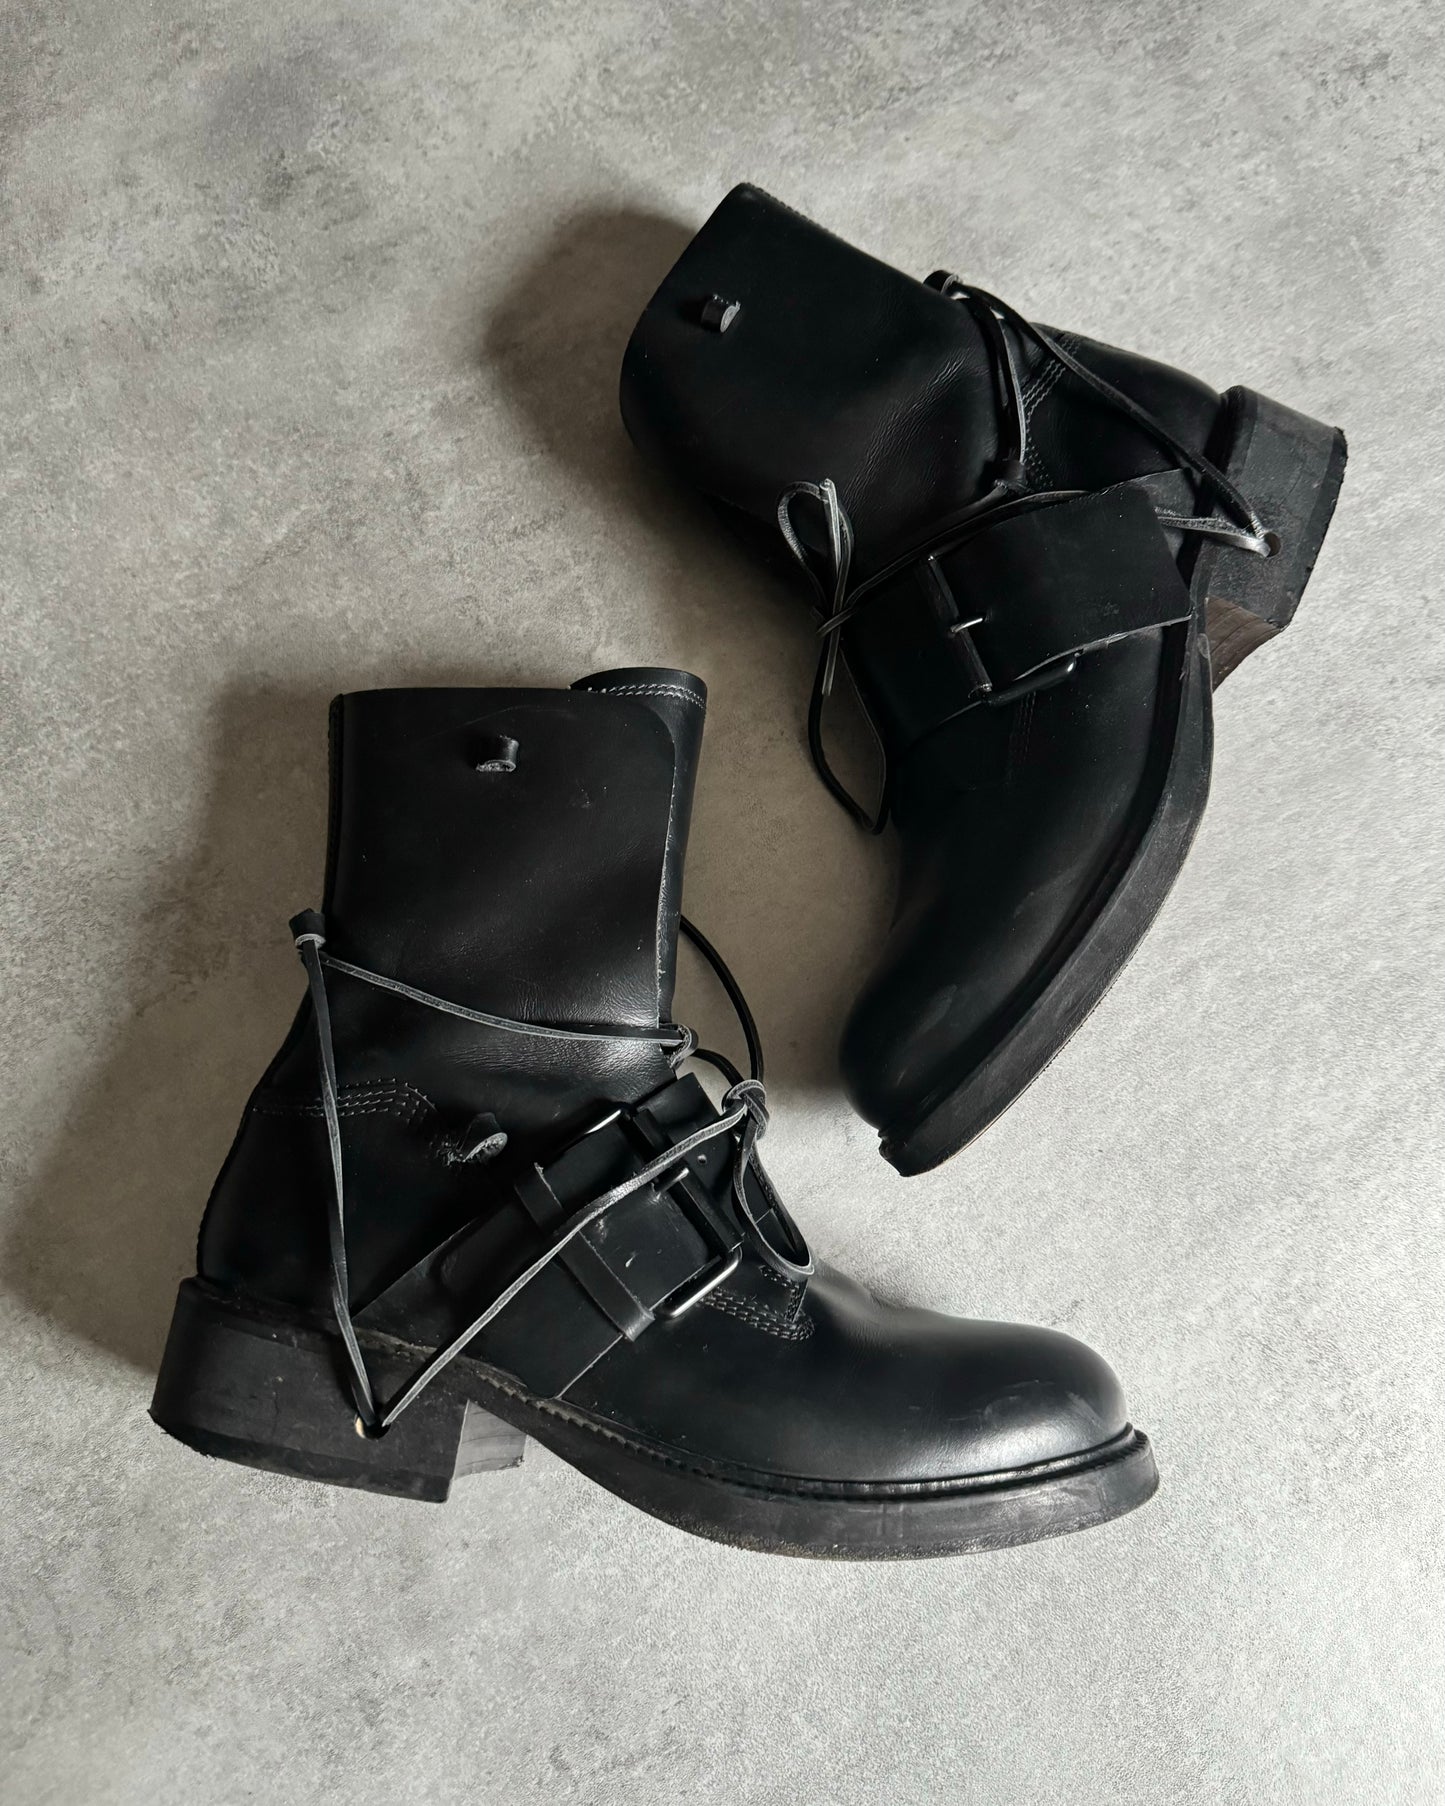 AW1998 Dirk Bikkembergs High Mountaineering Black Boots (43) - 3